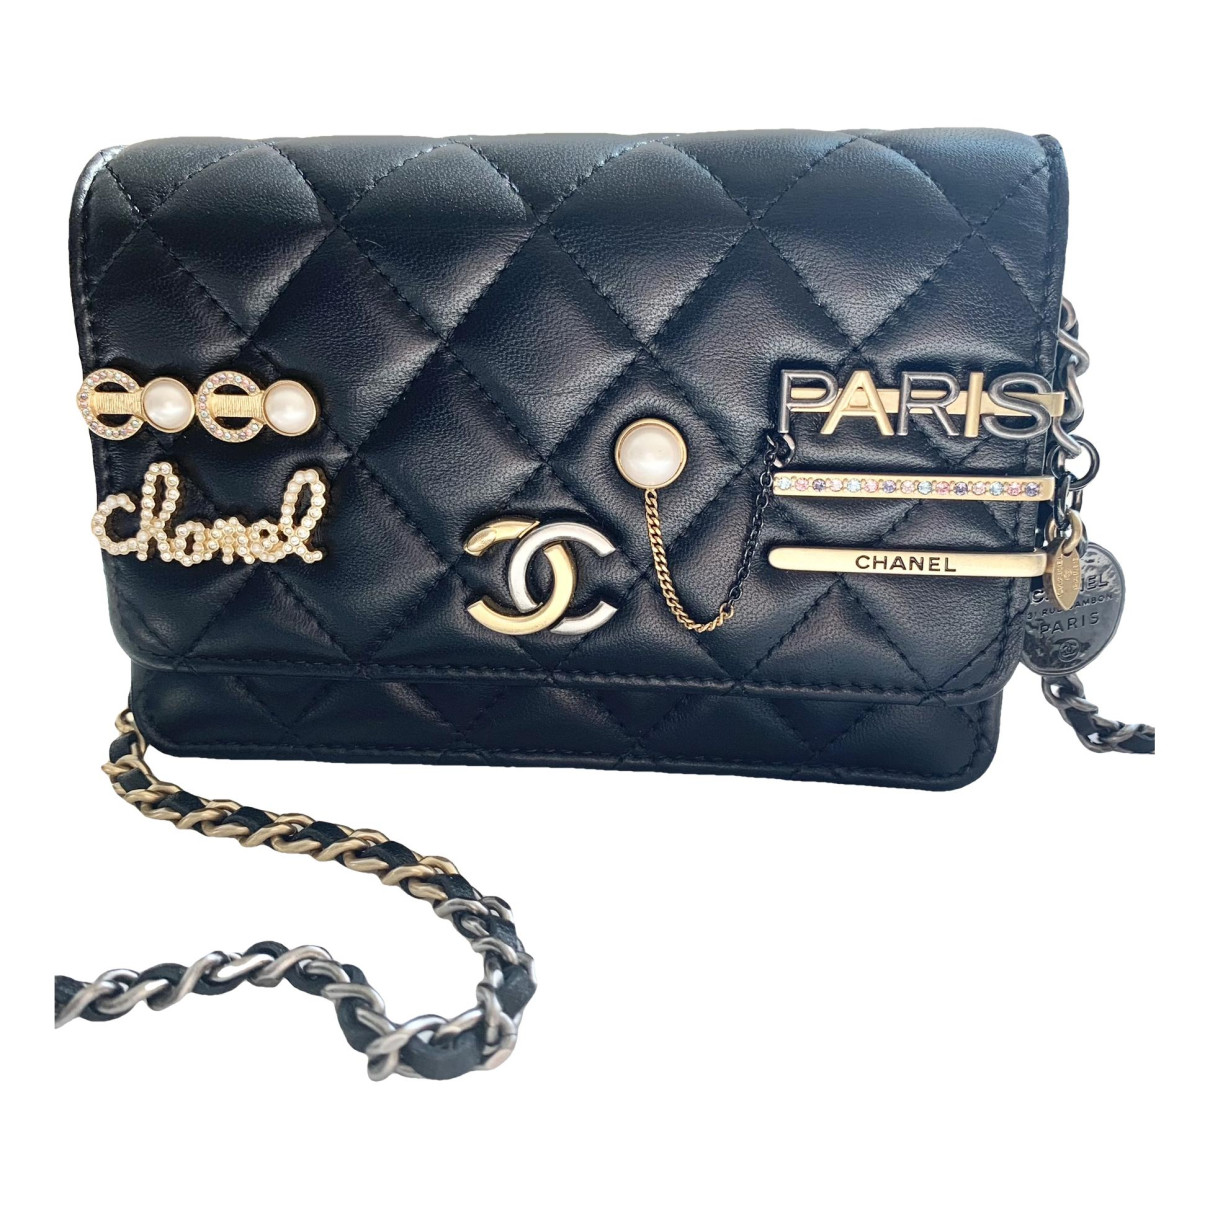 bags Chanel handbags Wallet on Chain for Female Leather. Used condition